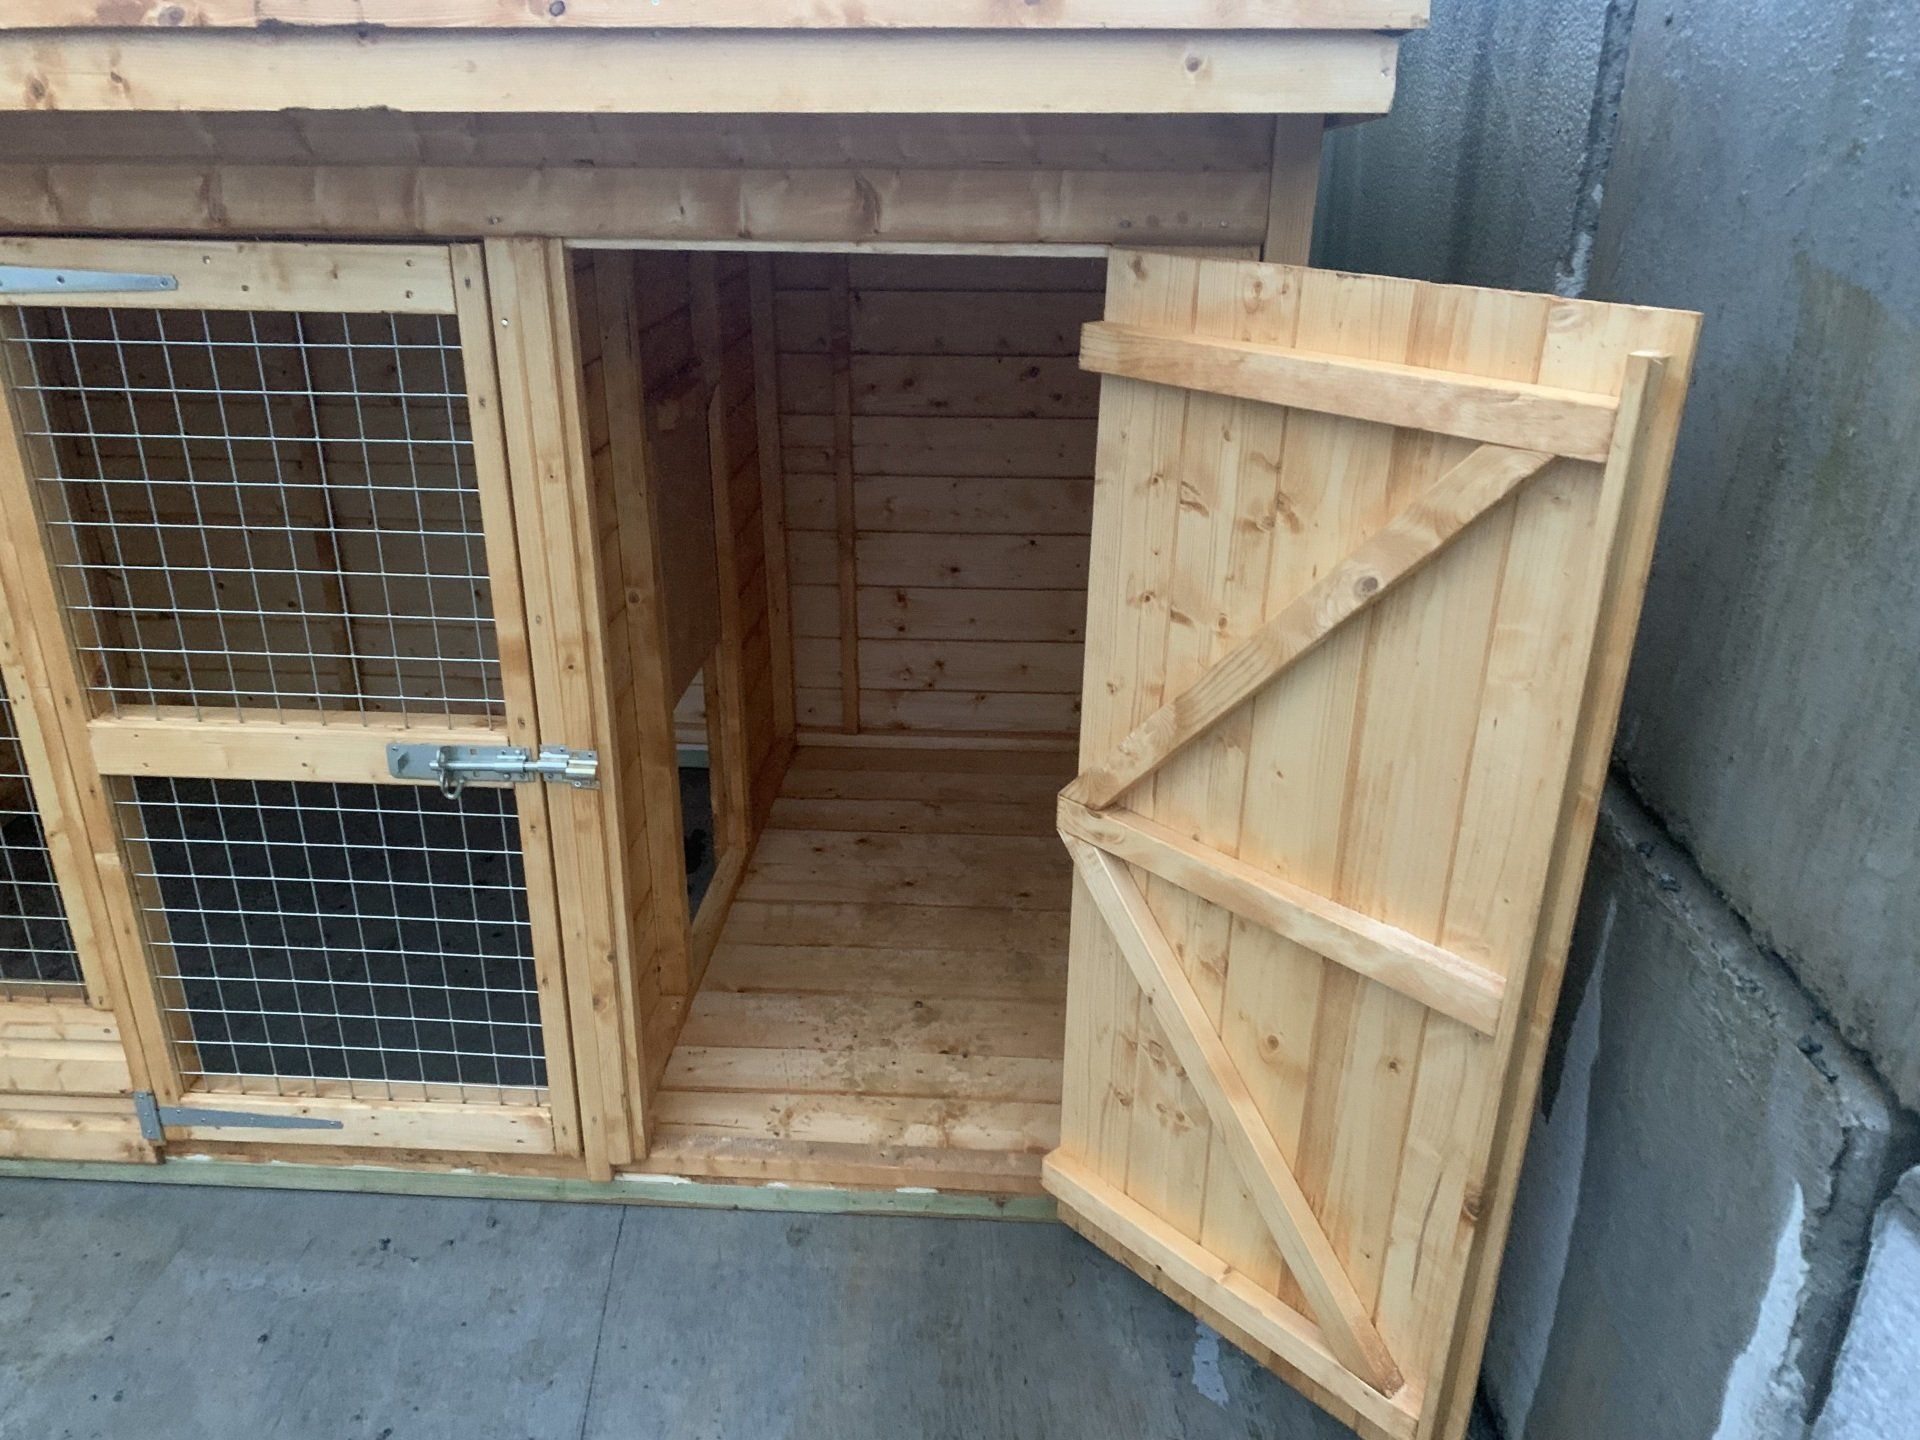 8' x 5' Kennel and run with the shutter between the run and kennel.